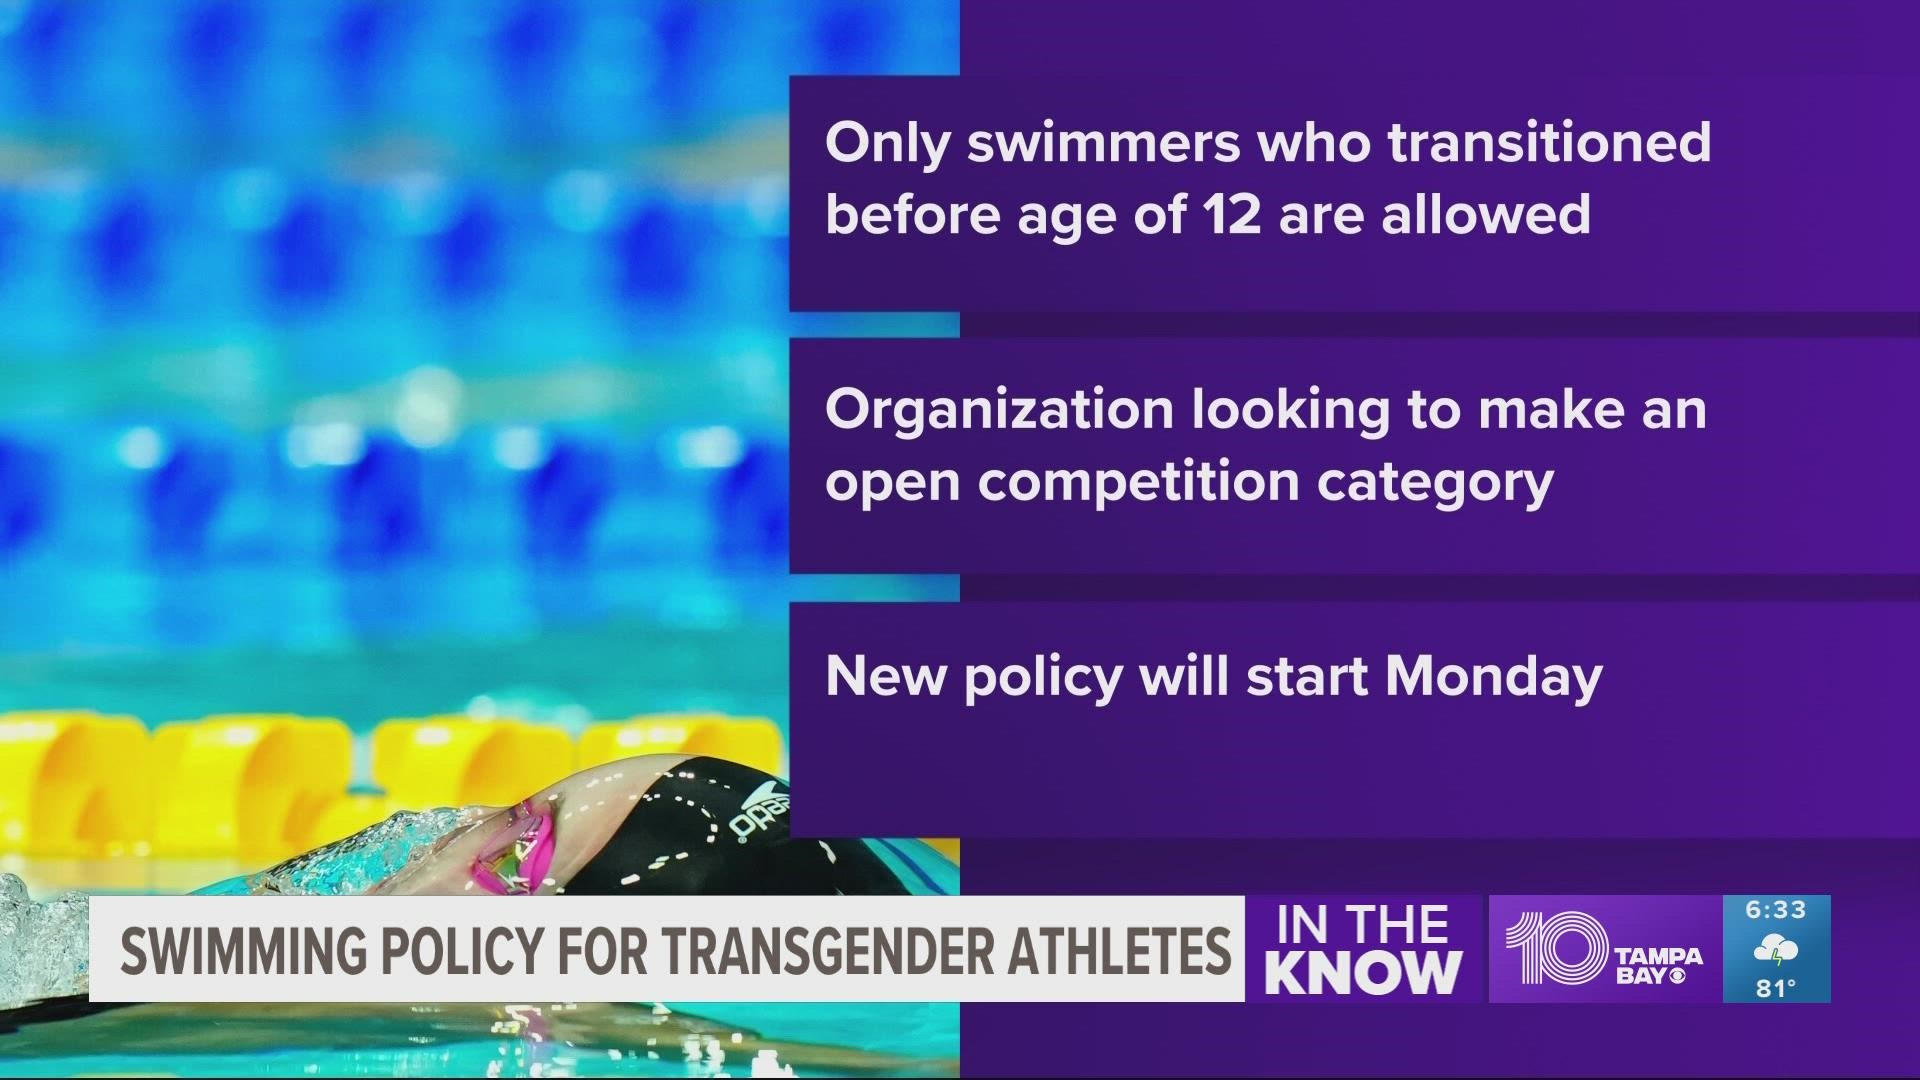 The new policy only permits swimmers who transitioned before age 12 to compete in women’s events.